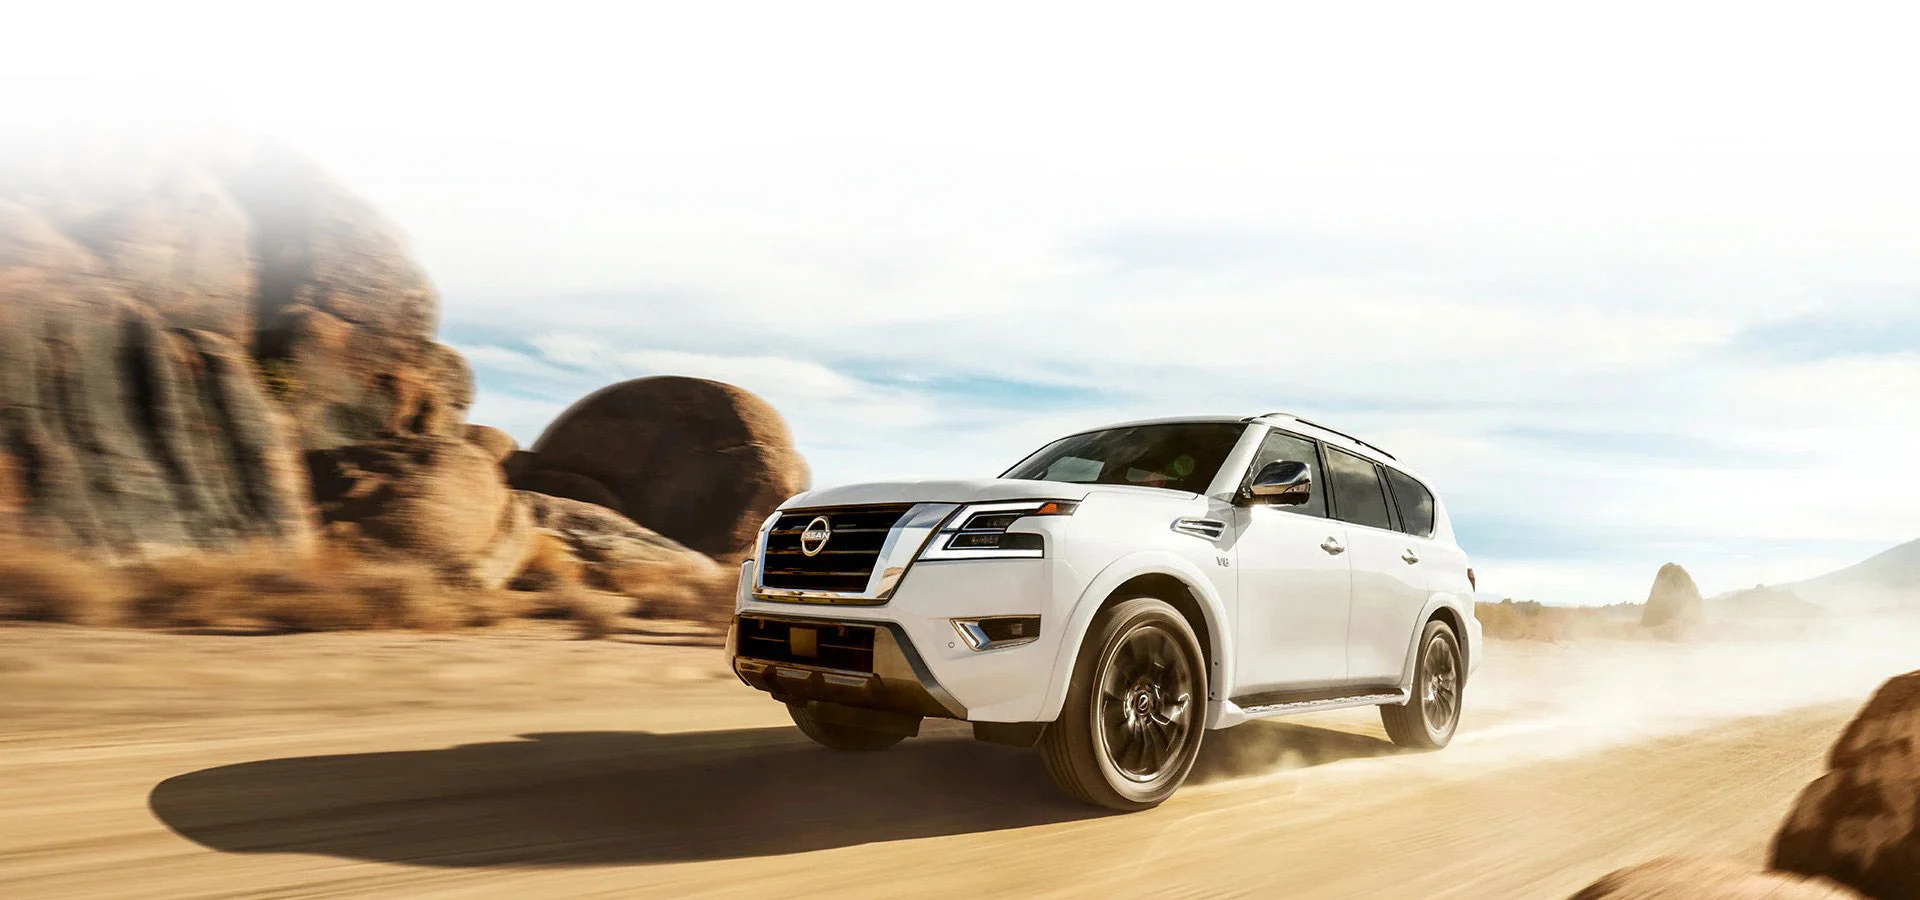 Car Review: The 2021 Nissan Armada is a capable, comfortable and modern SUV  - WTOP News